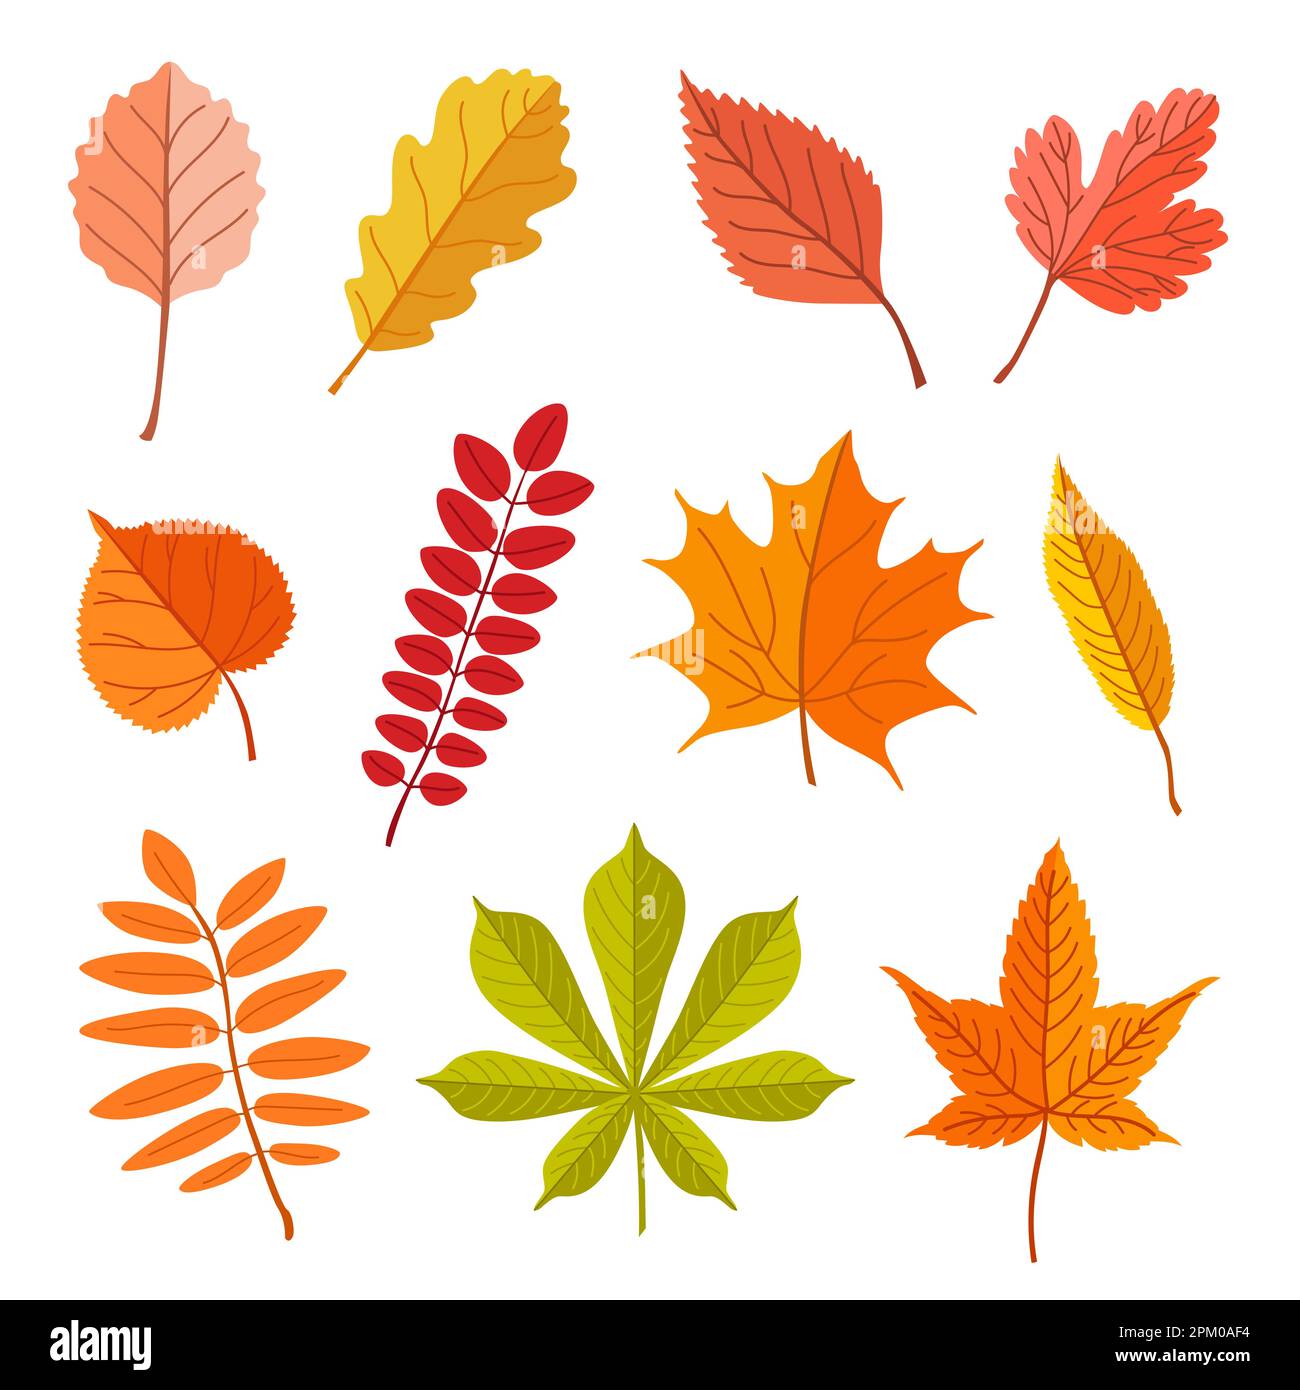 Fallen leaves of different trees vector illustrations set Stock Vector